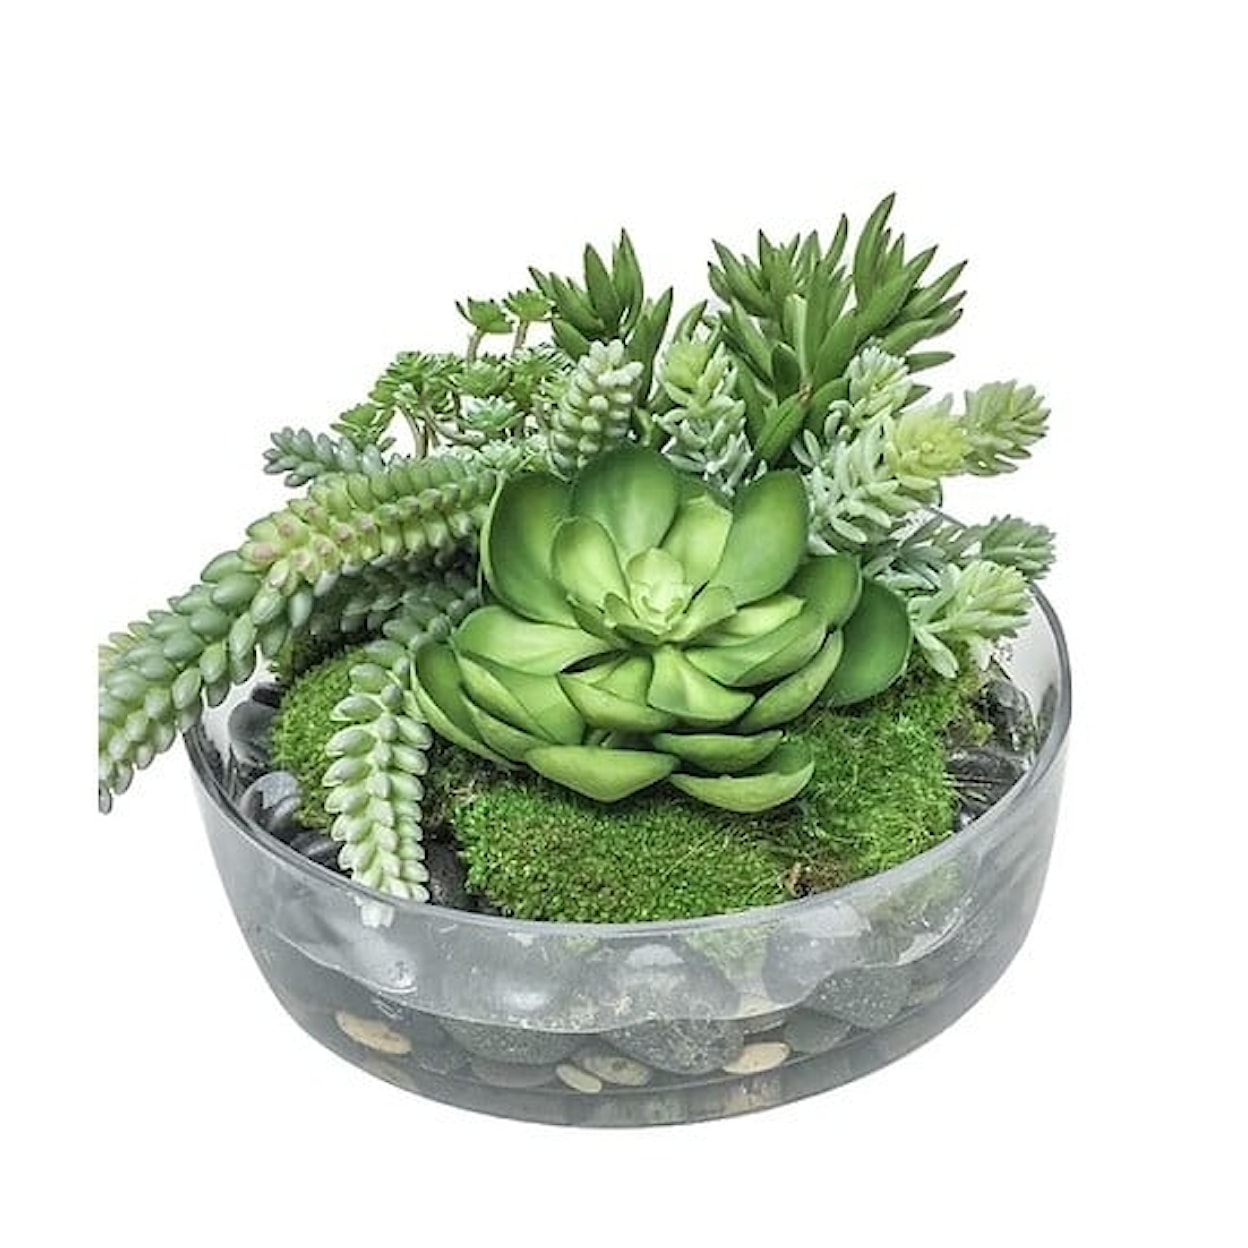 The Ivy Guild Succulents Succulents in Glass Bowl 